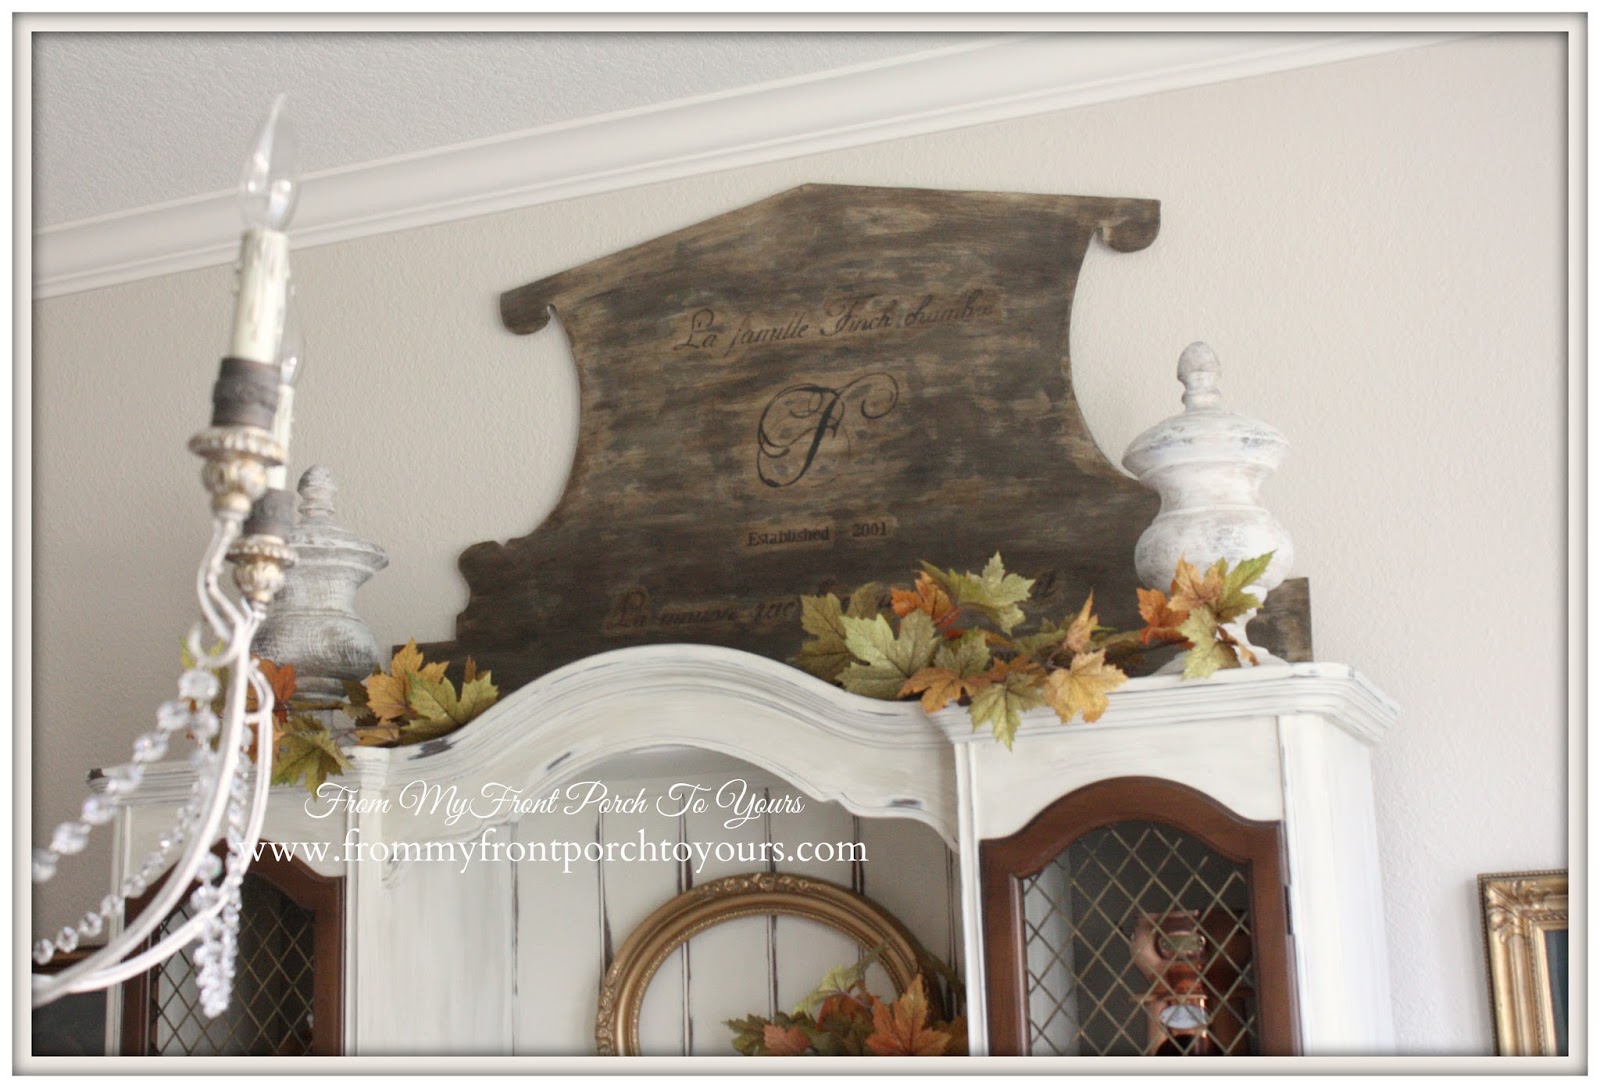 From My Front Porch To Yours- Fall Dining Room 2014- French Farmhouse Dining Room